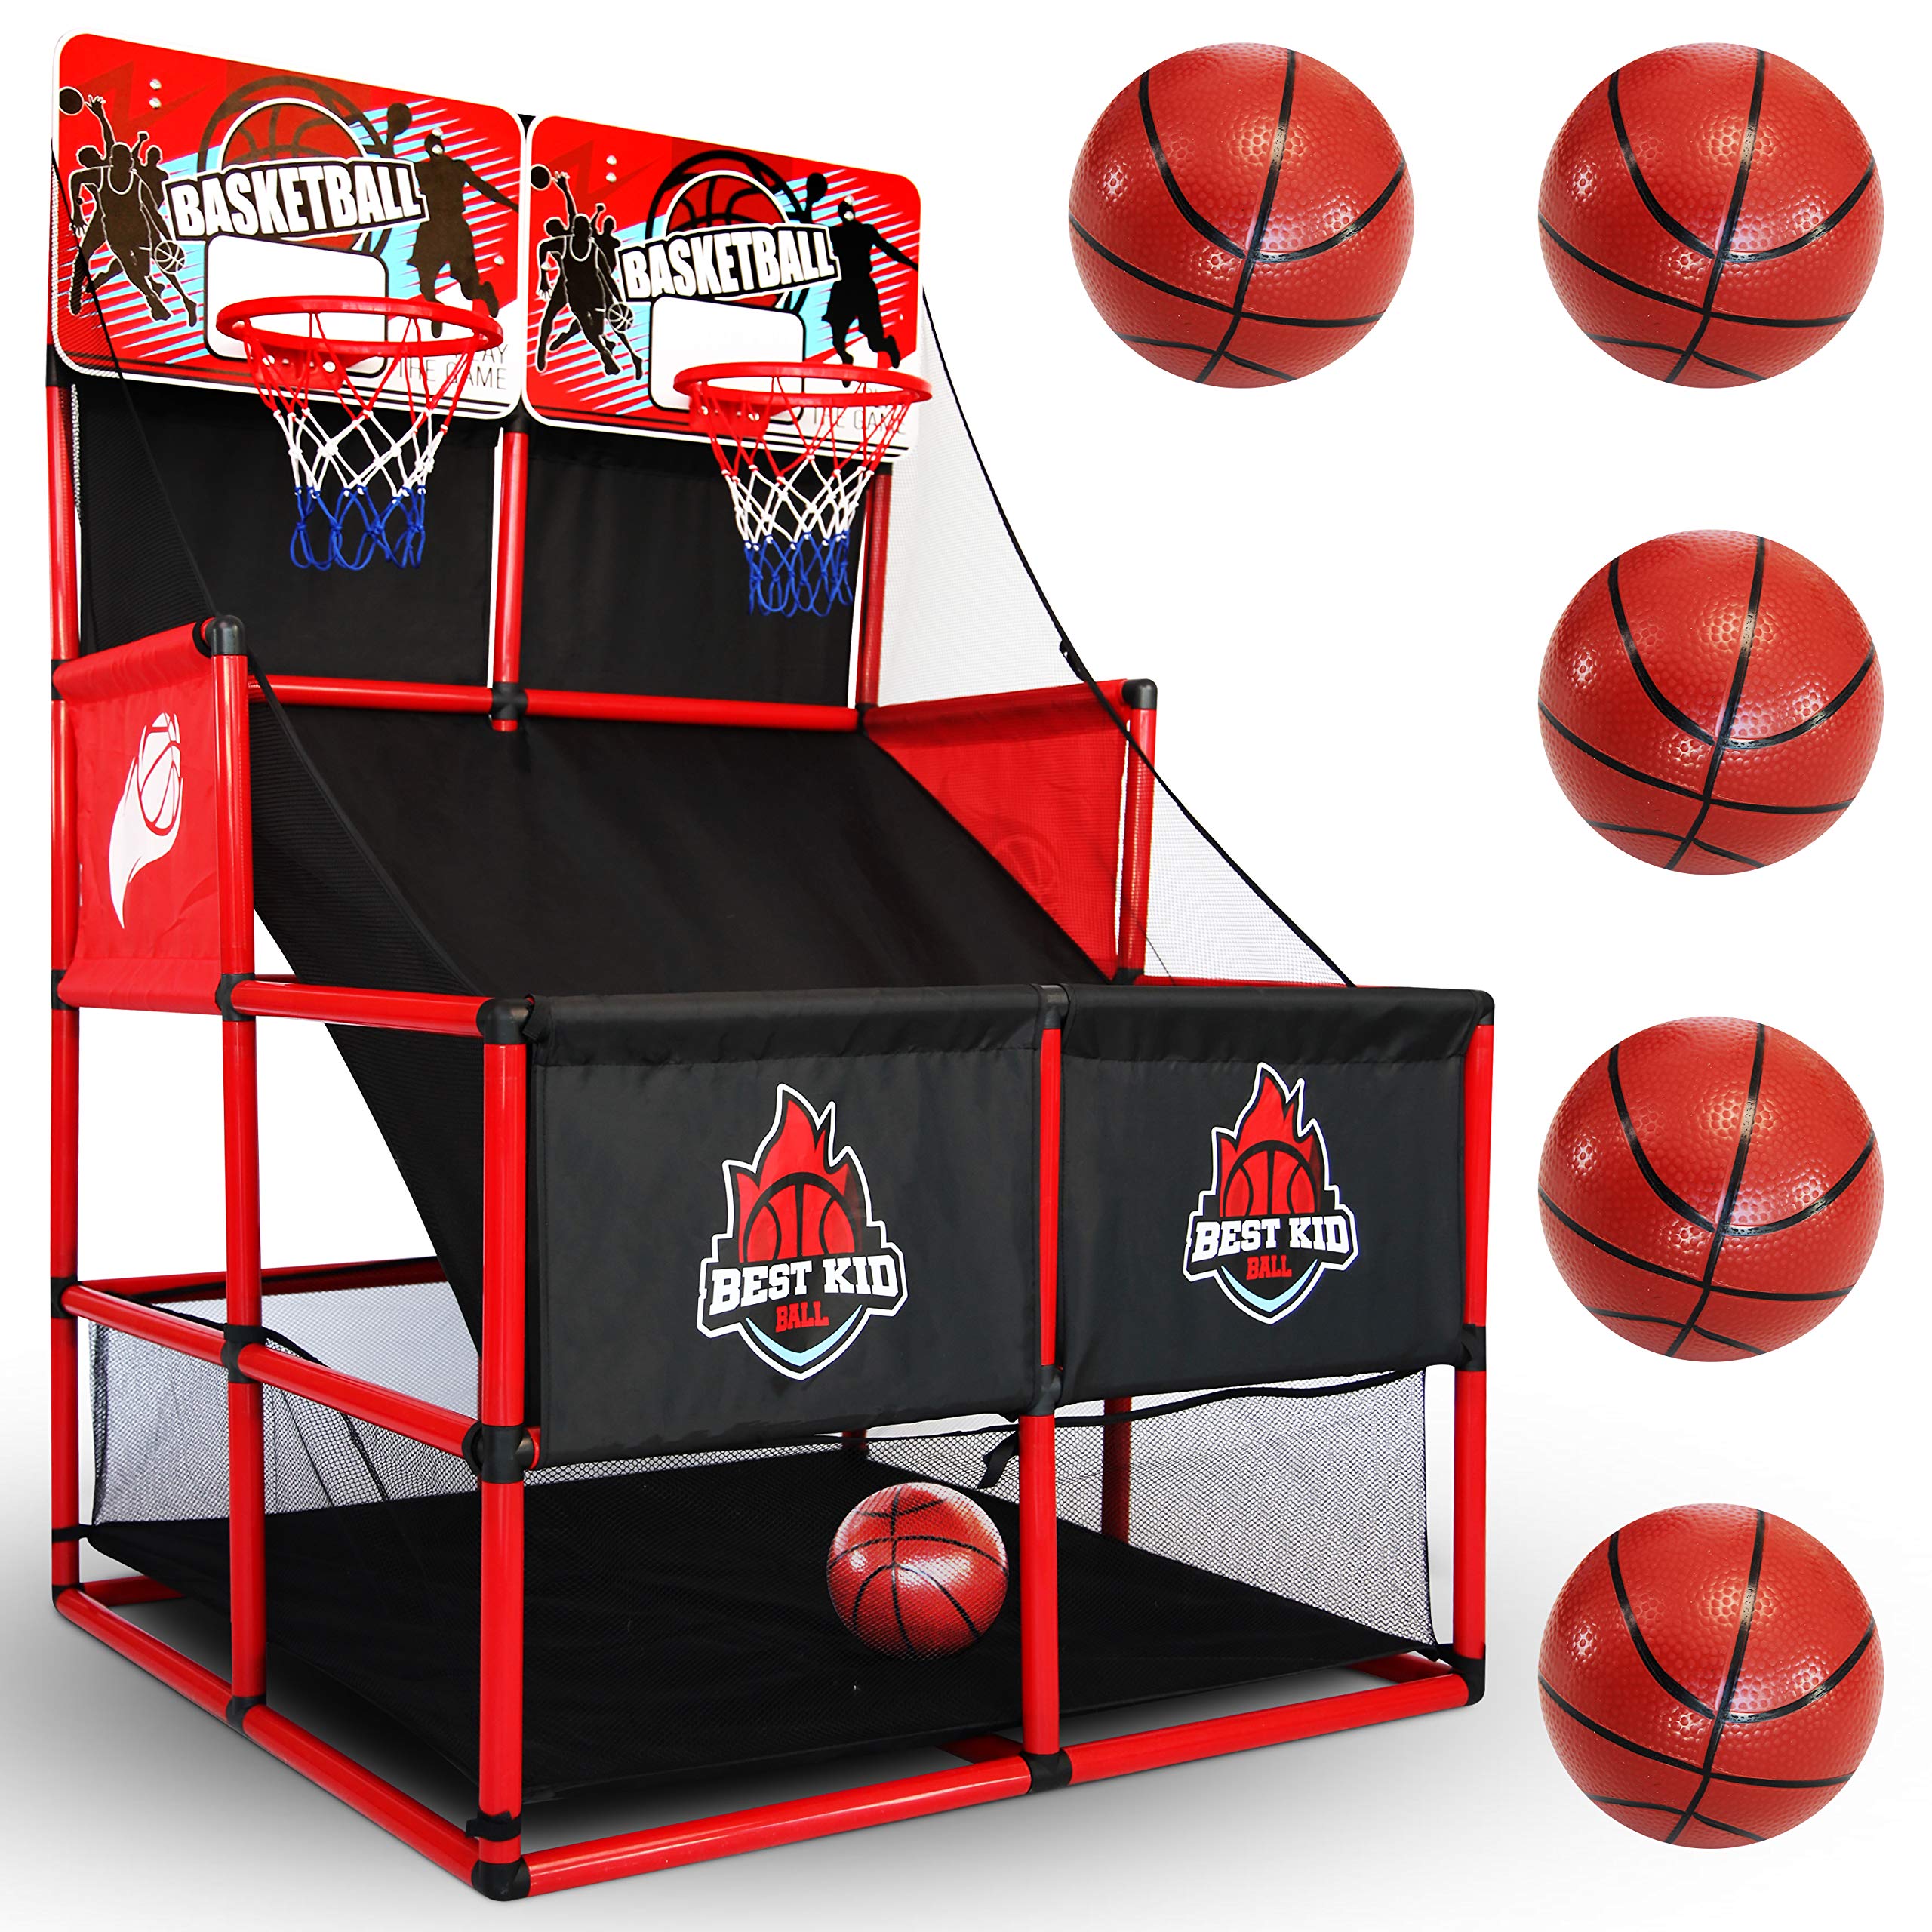 BESTKID BALL Kids Basketball Hoop Arcade Game - Indoor & Outdoor Double Shot System Kids Toy Include 4 Balls & Pump – 3 4 5 6 7 8 9 Years Old Boys, Girls, Children, Toddlers Fun Sports